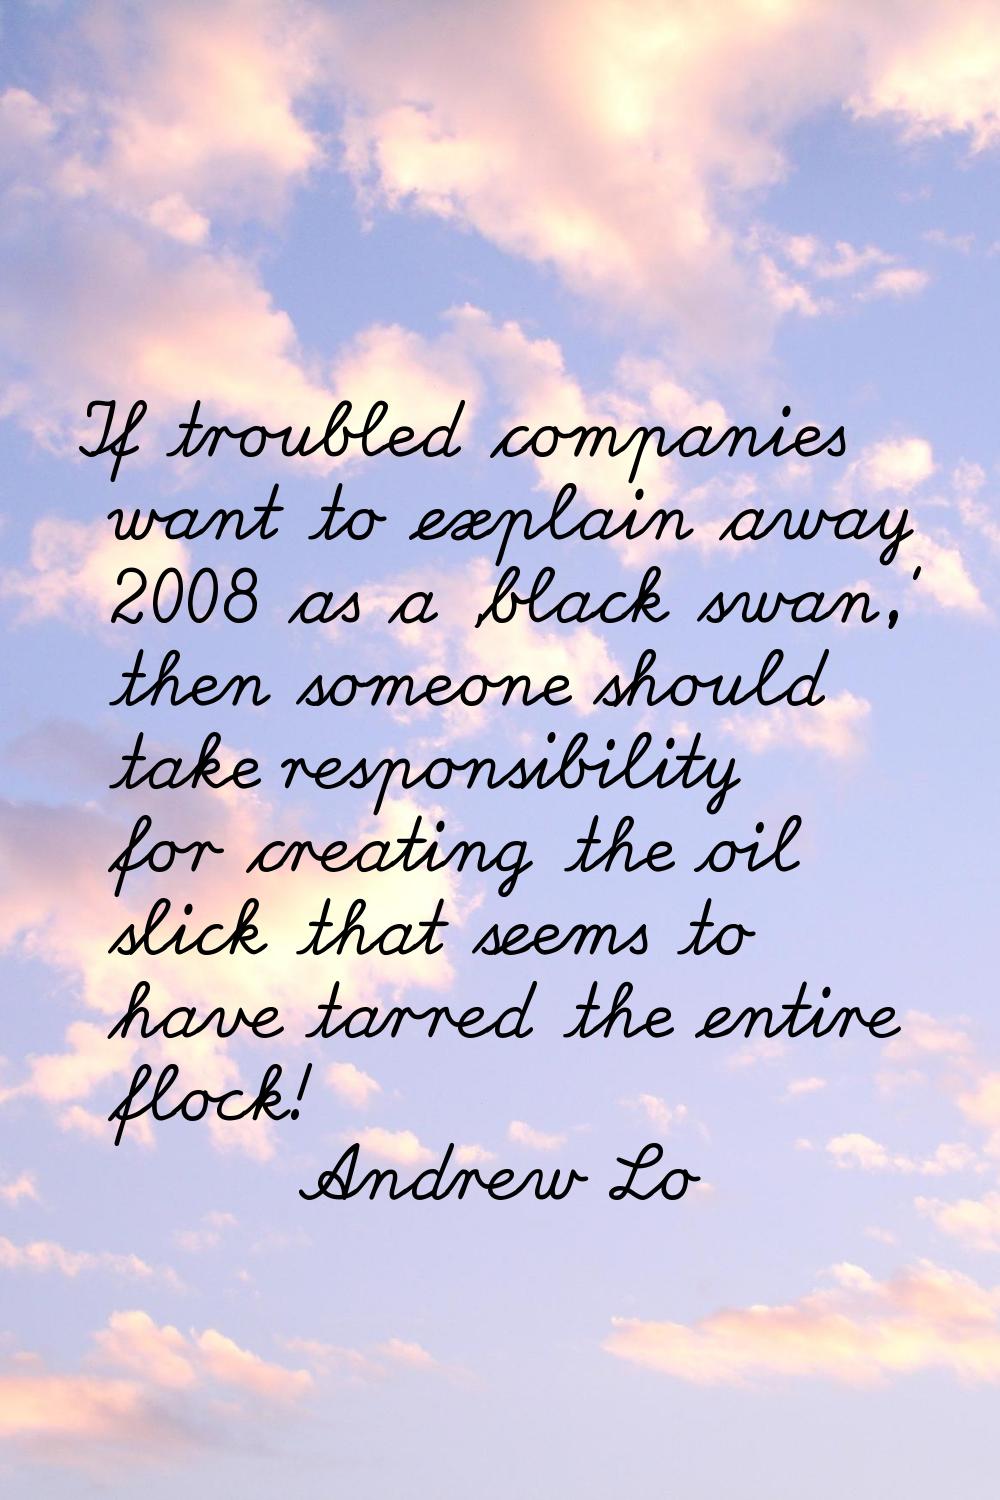 If troubled companies want to explain away 2008 as a 'black swan,' then someone should take respons